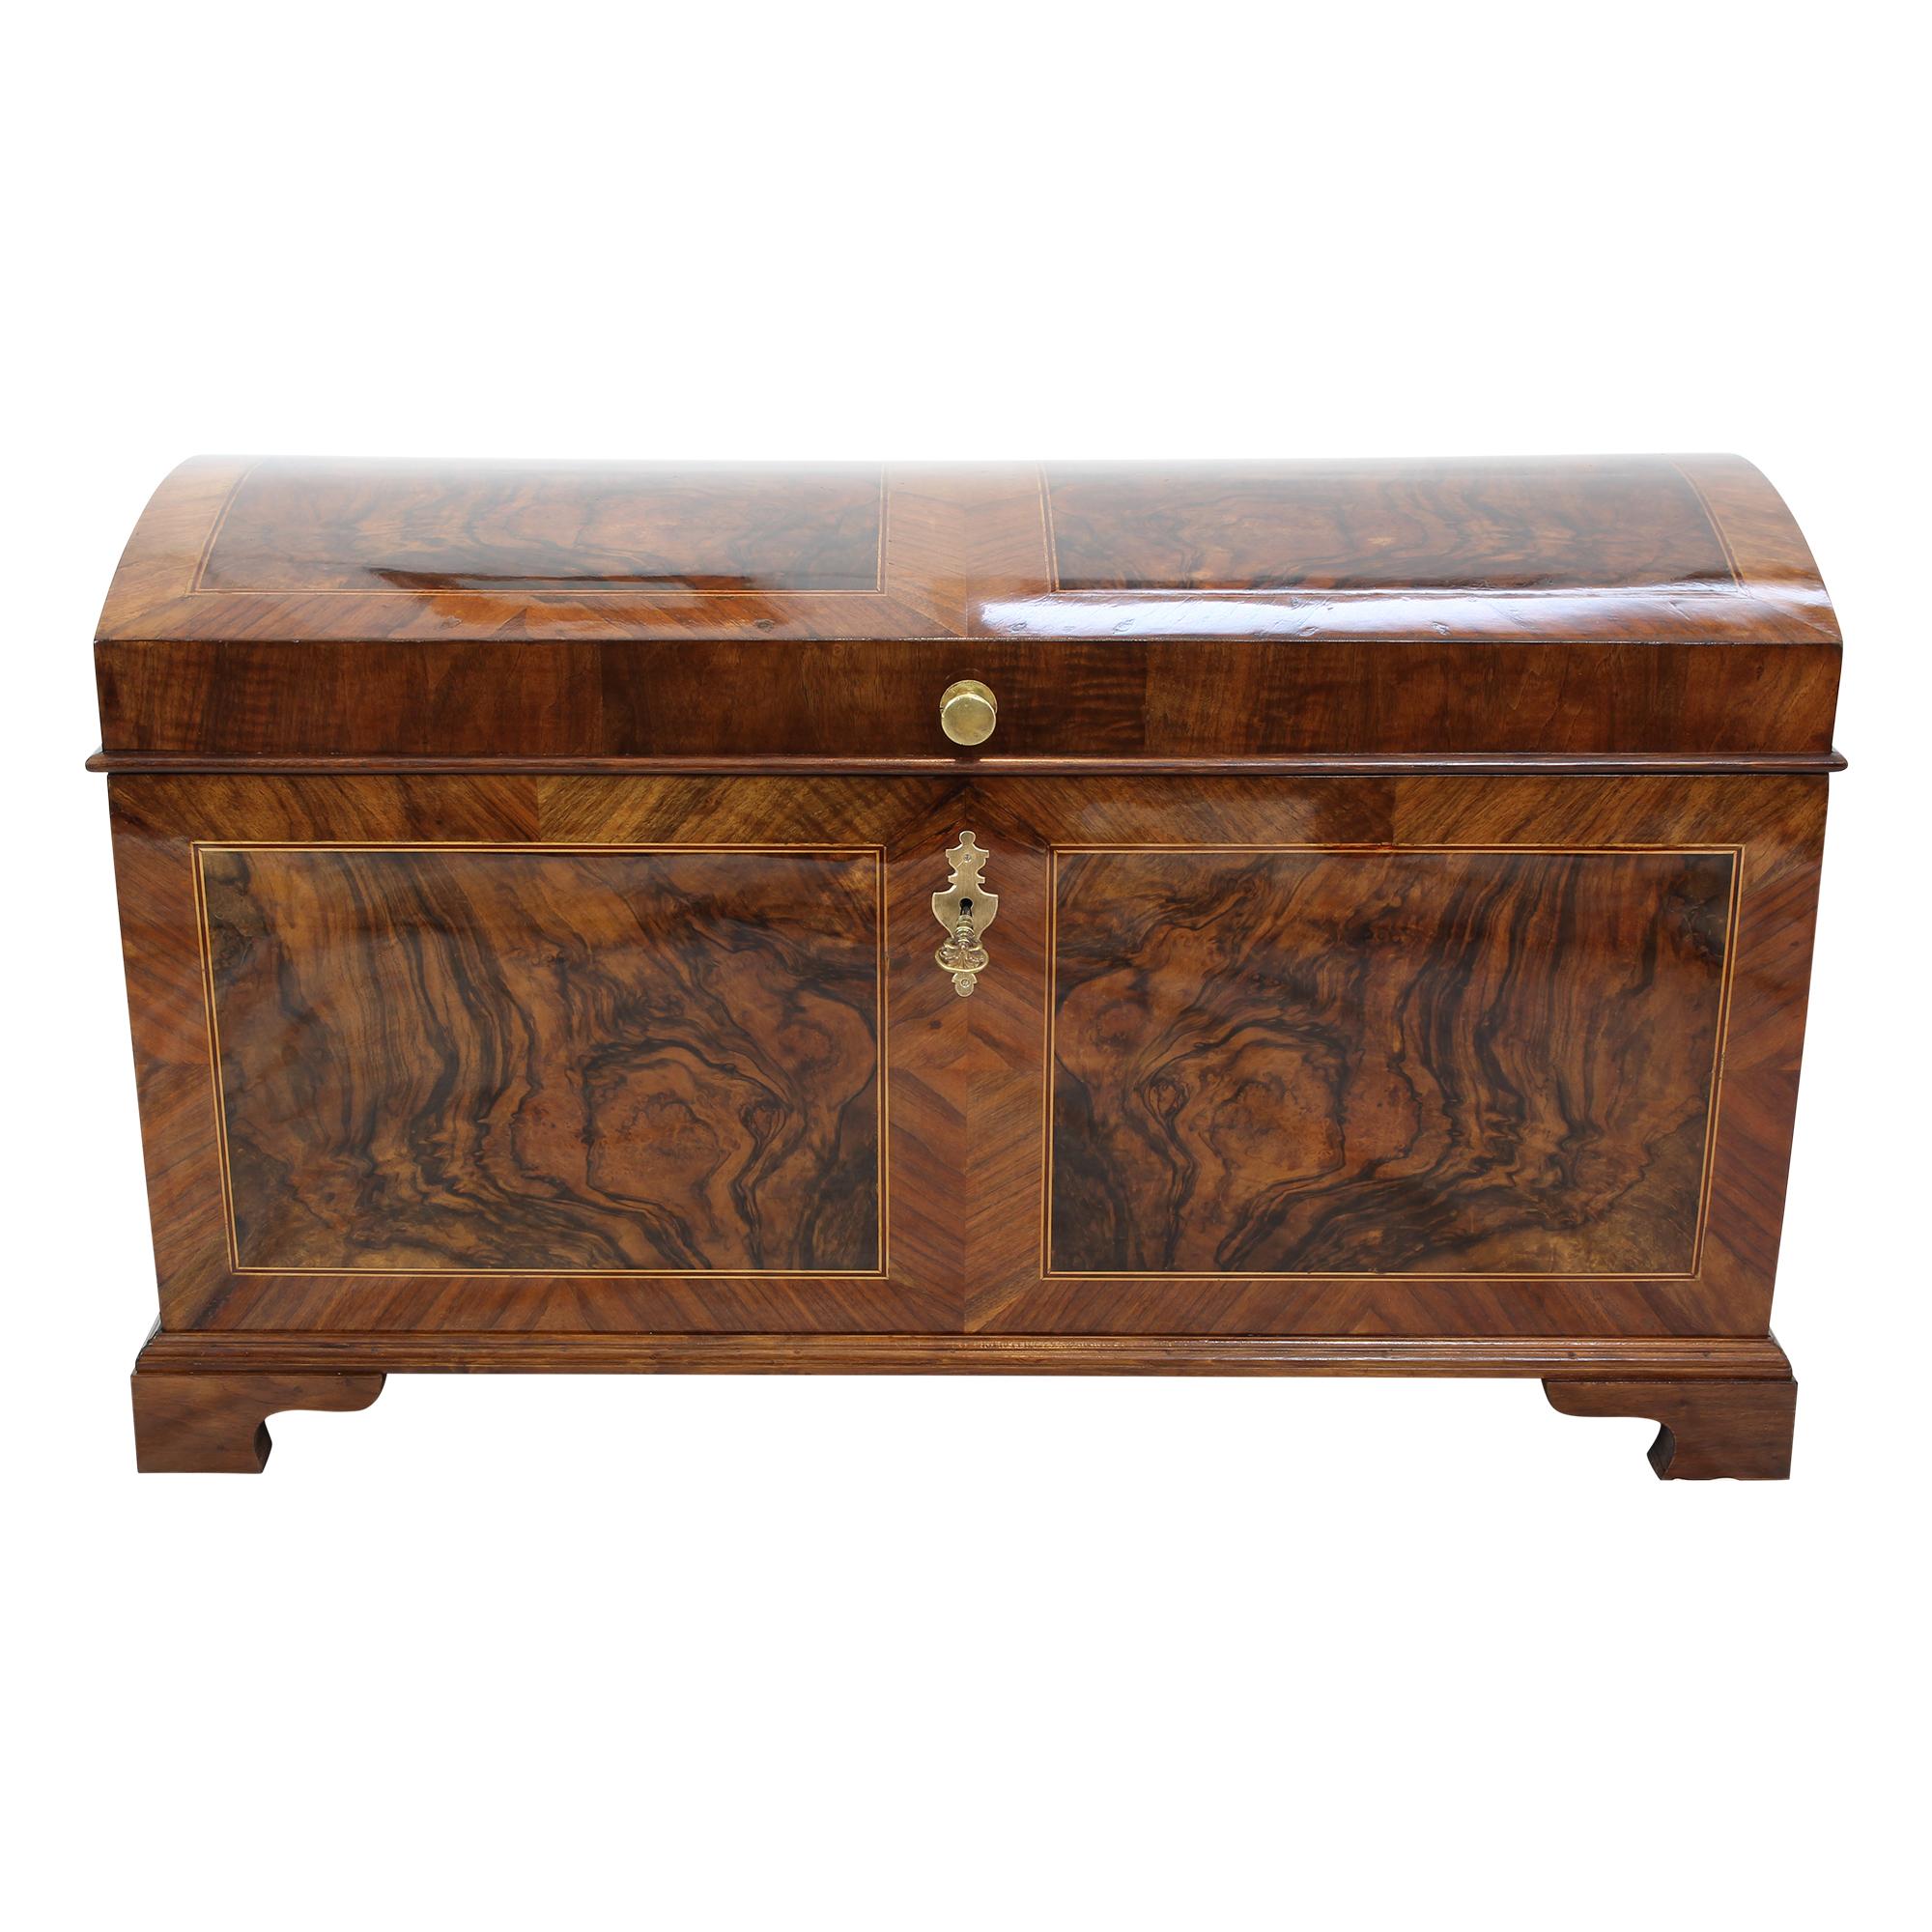 The chest is from the Baroque period circa 1750, the chest is covered with a walnut marquetry, the body is also spruce. The lid of the chest is raised by placing the flap of the side storage compartment, as it should be. The chest is in very good